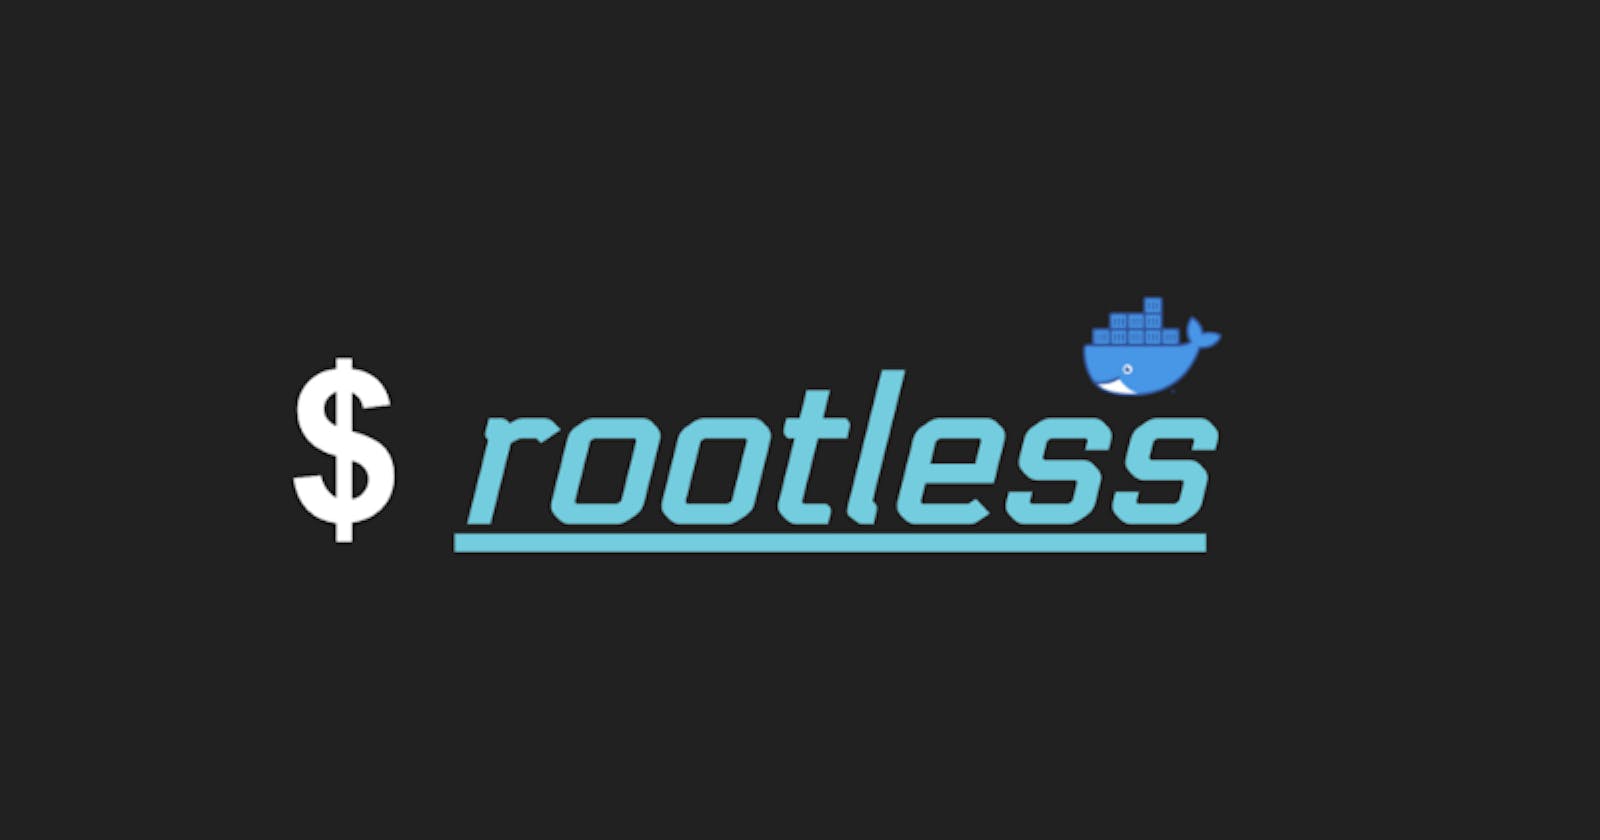 Running Minecraft in Rootless Mode in a Docker Container